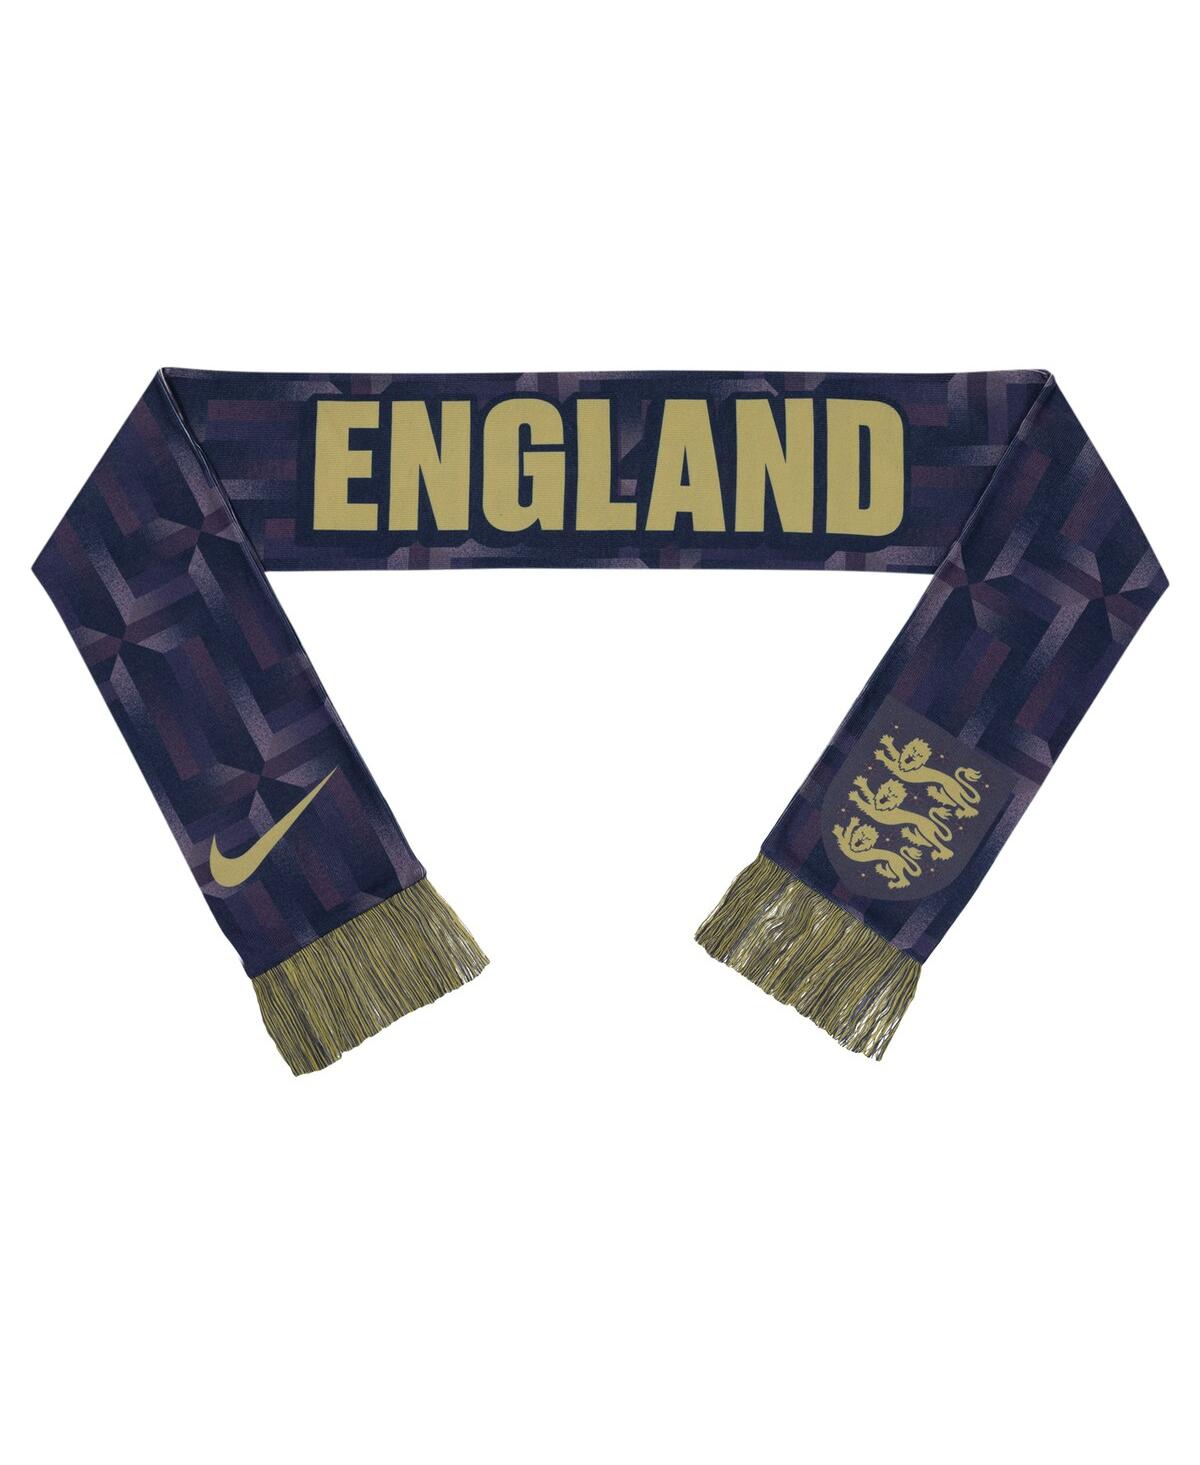 England National Team Local Verbiage Scarf